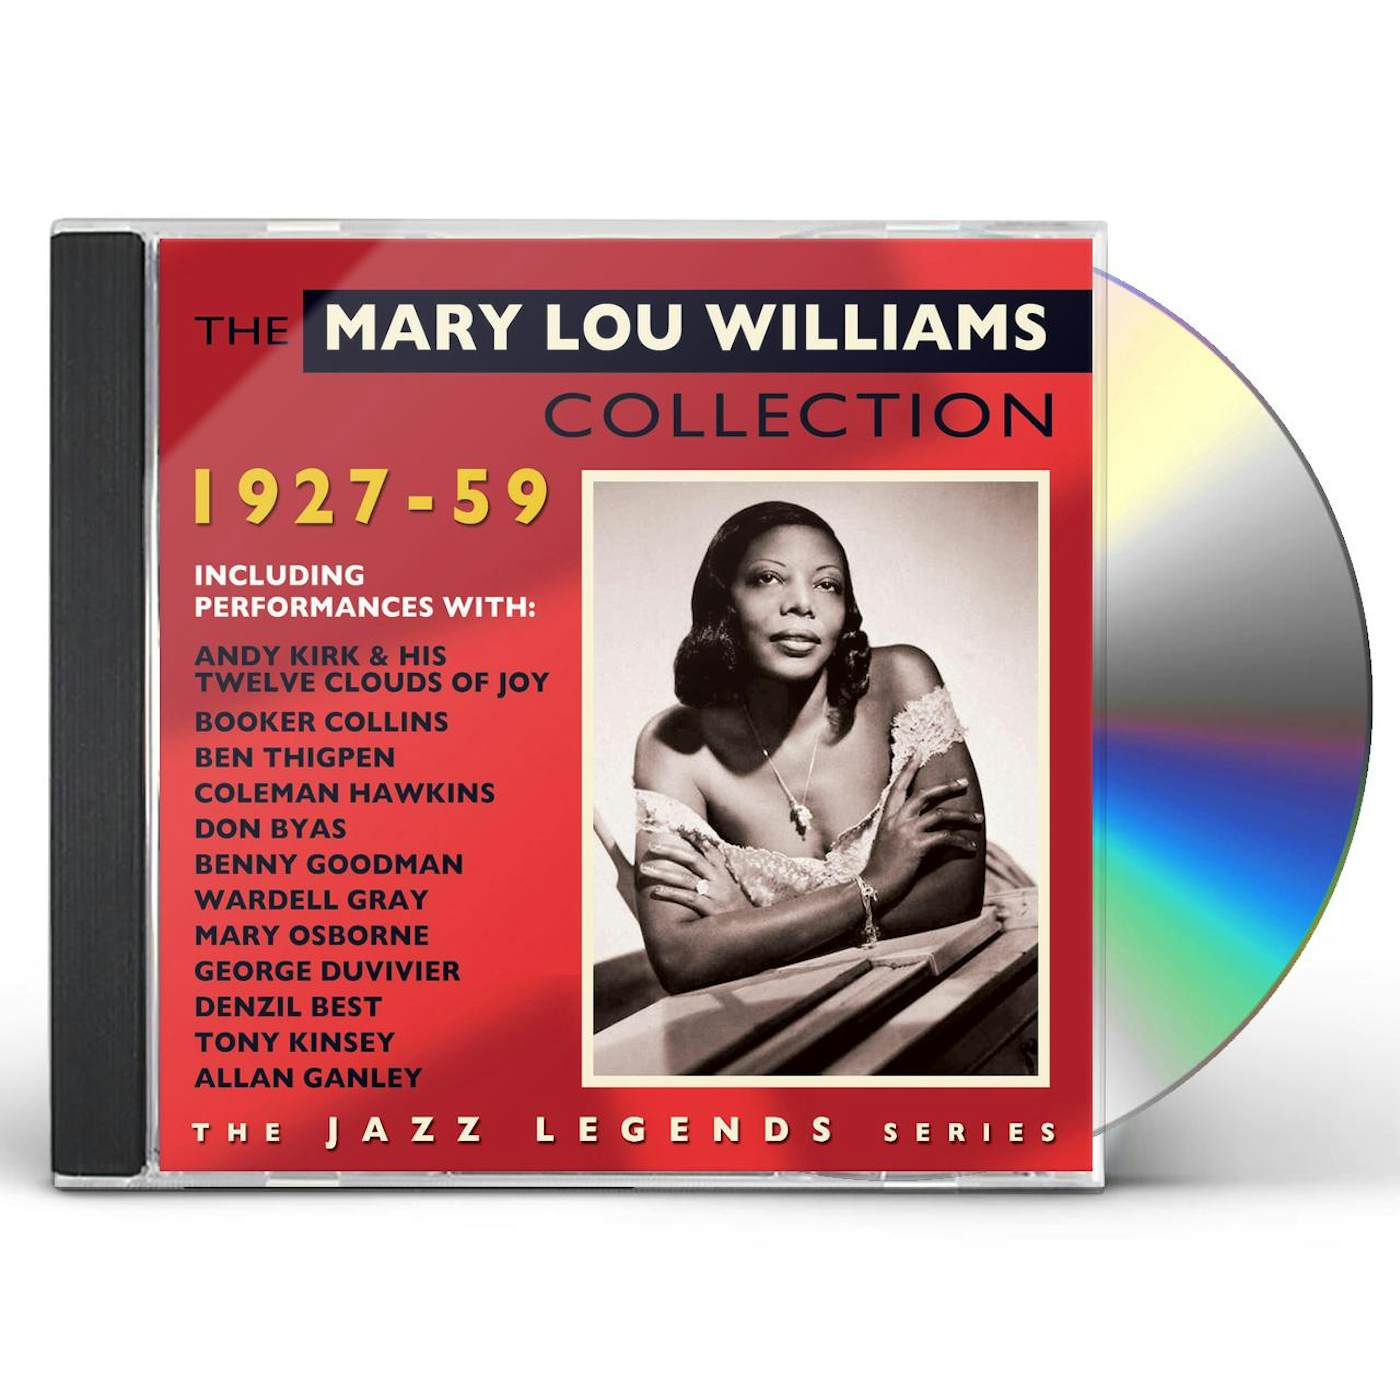 Mary Lou Williams COLLECTION 1927-59 CD